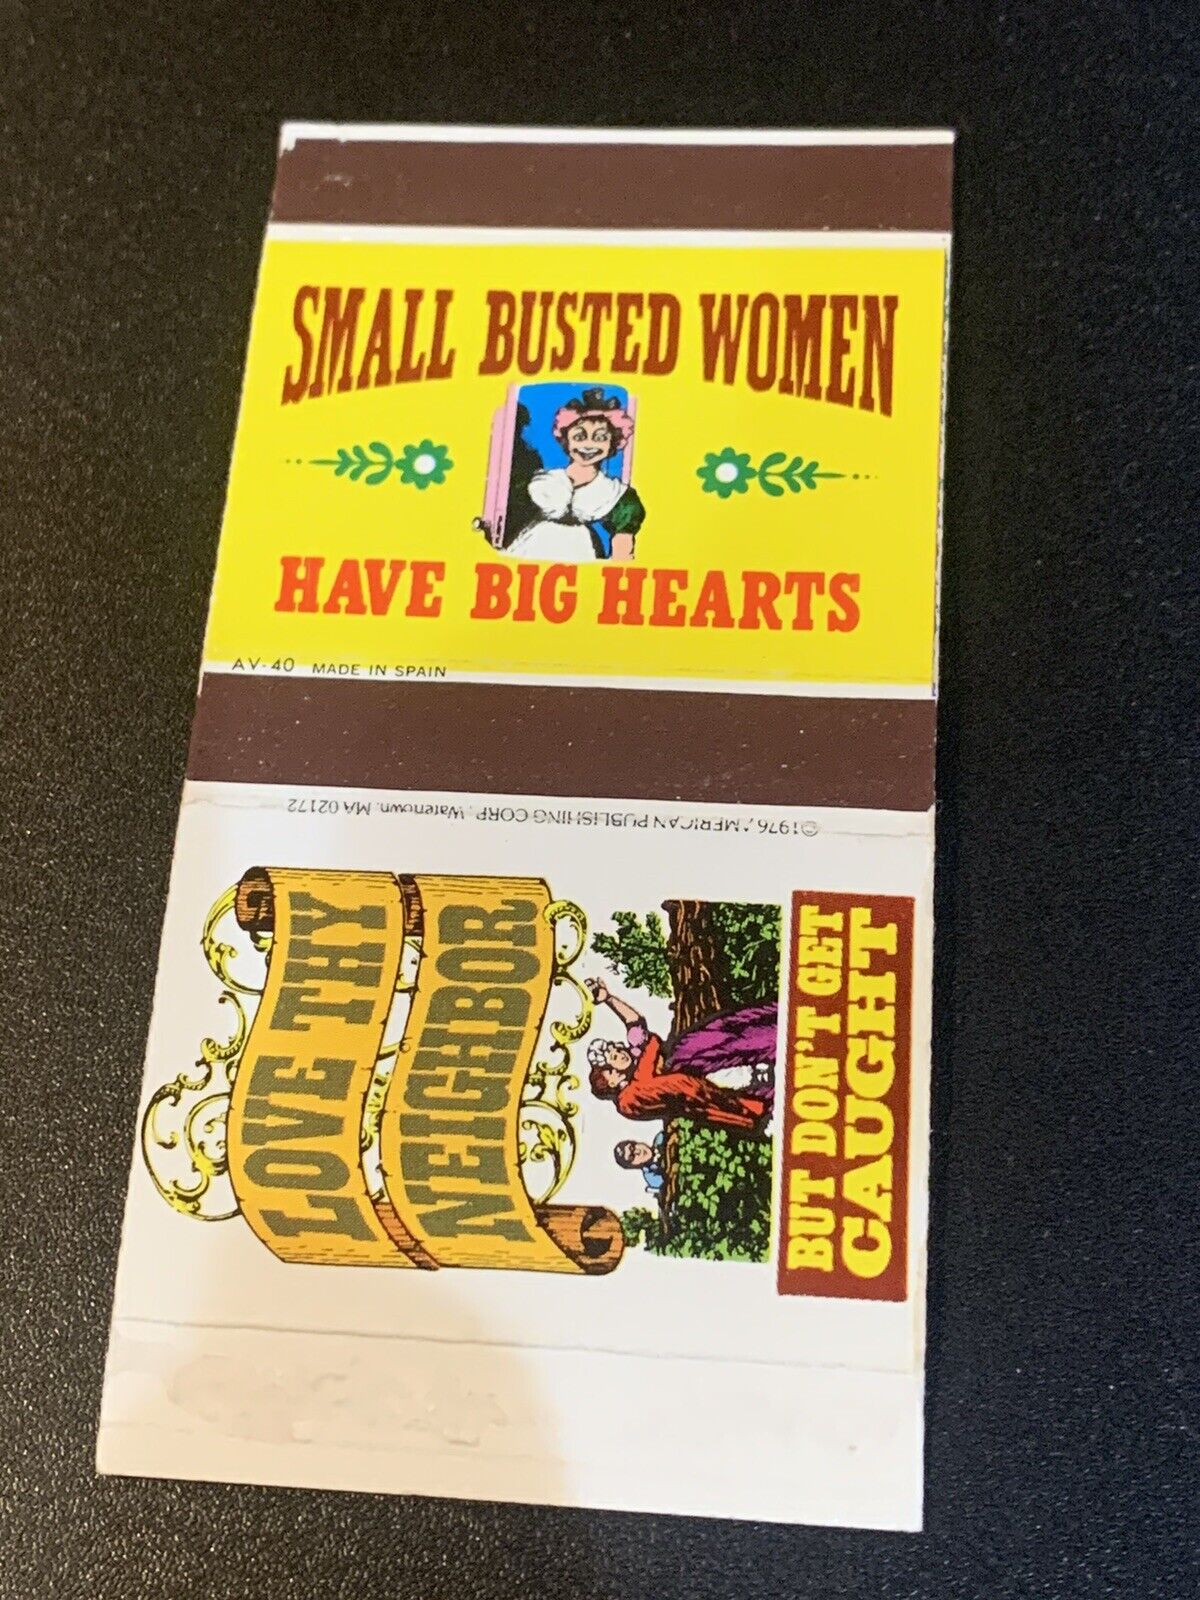 Vintage Bobtail Matchbook: “Small Busted Women Have Big Hearts”